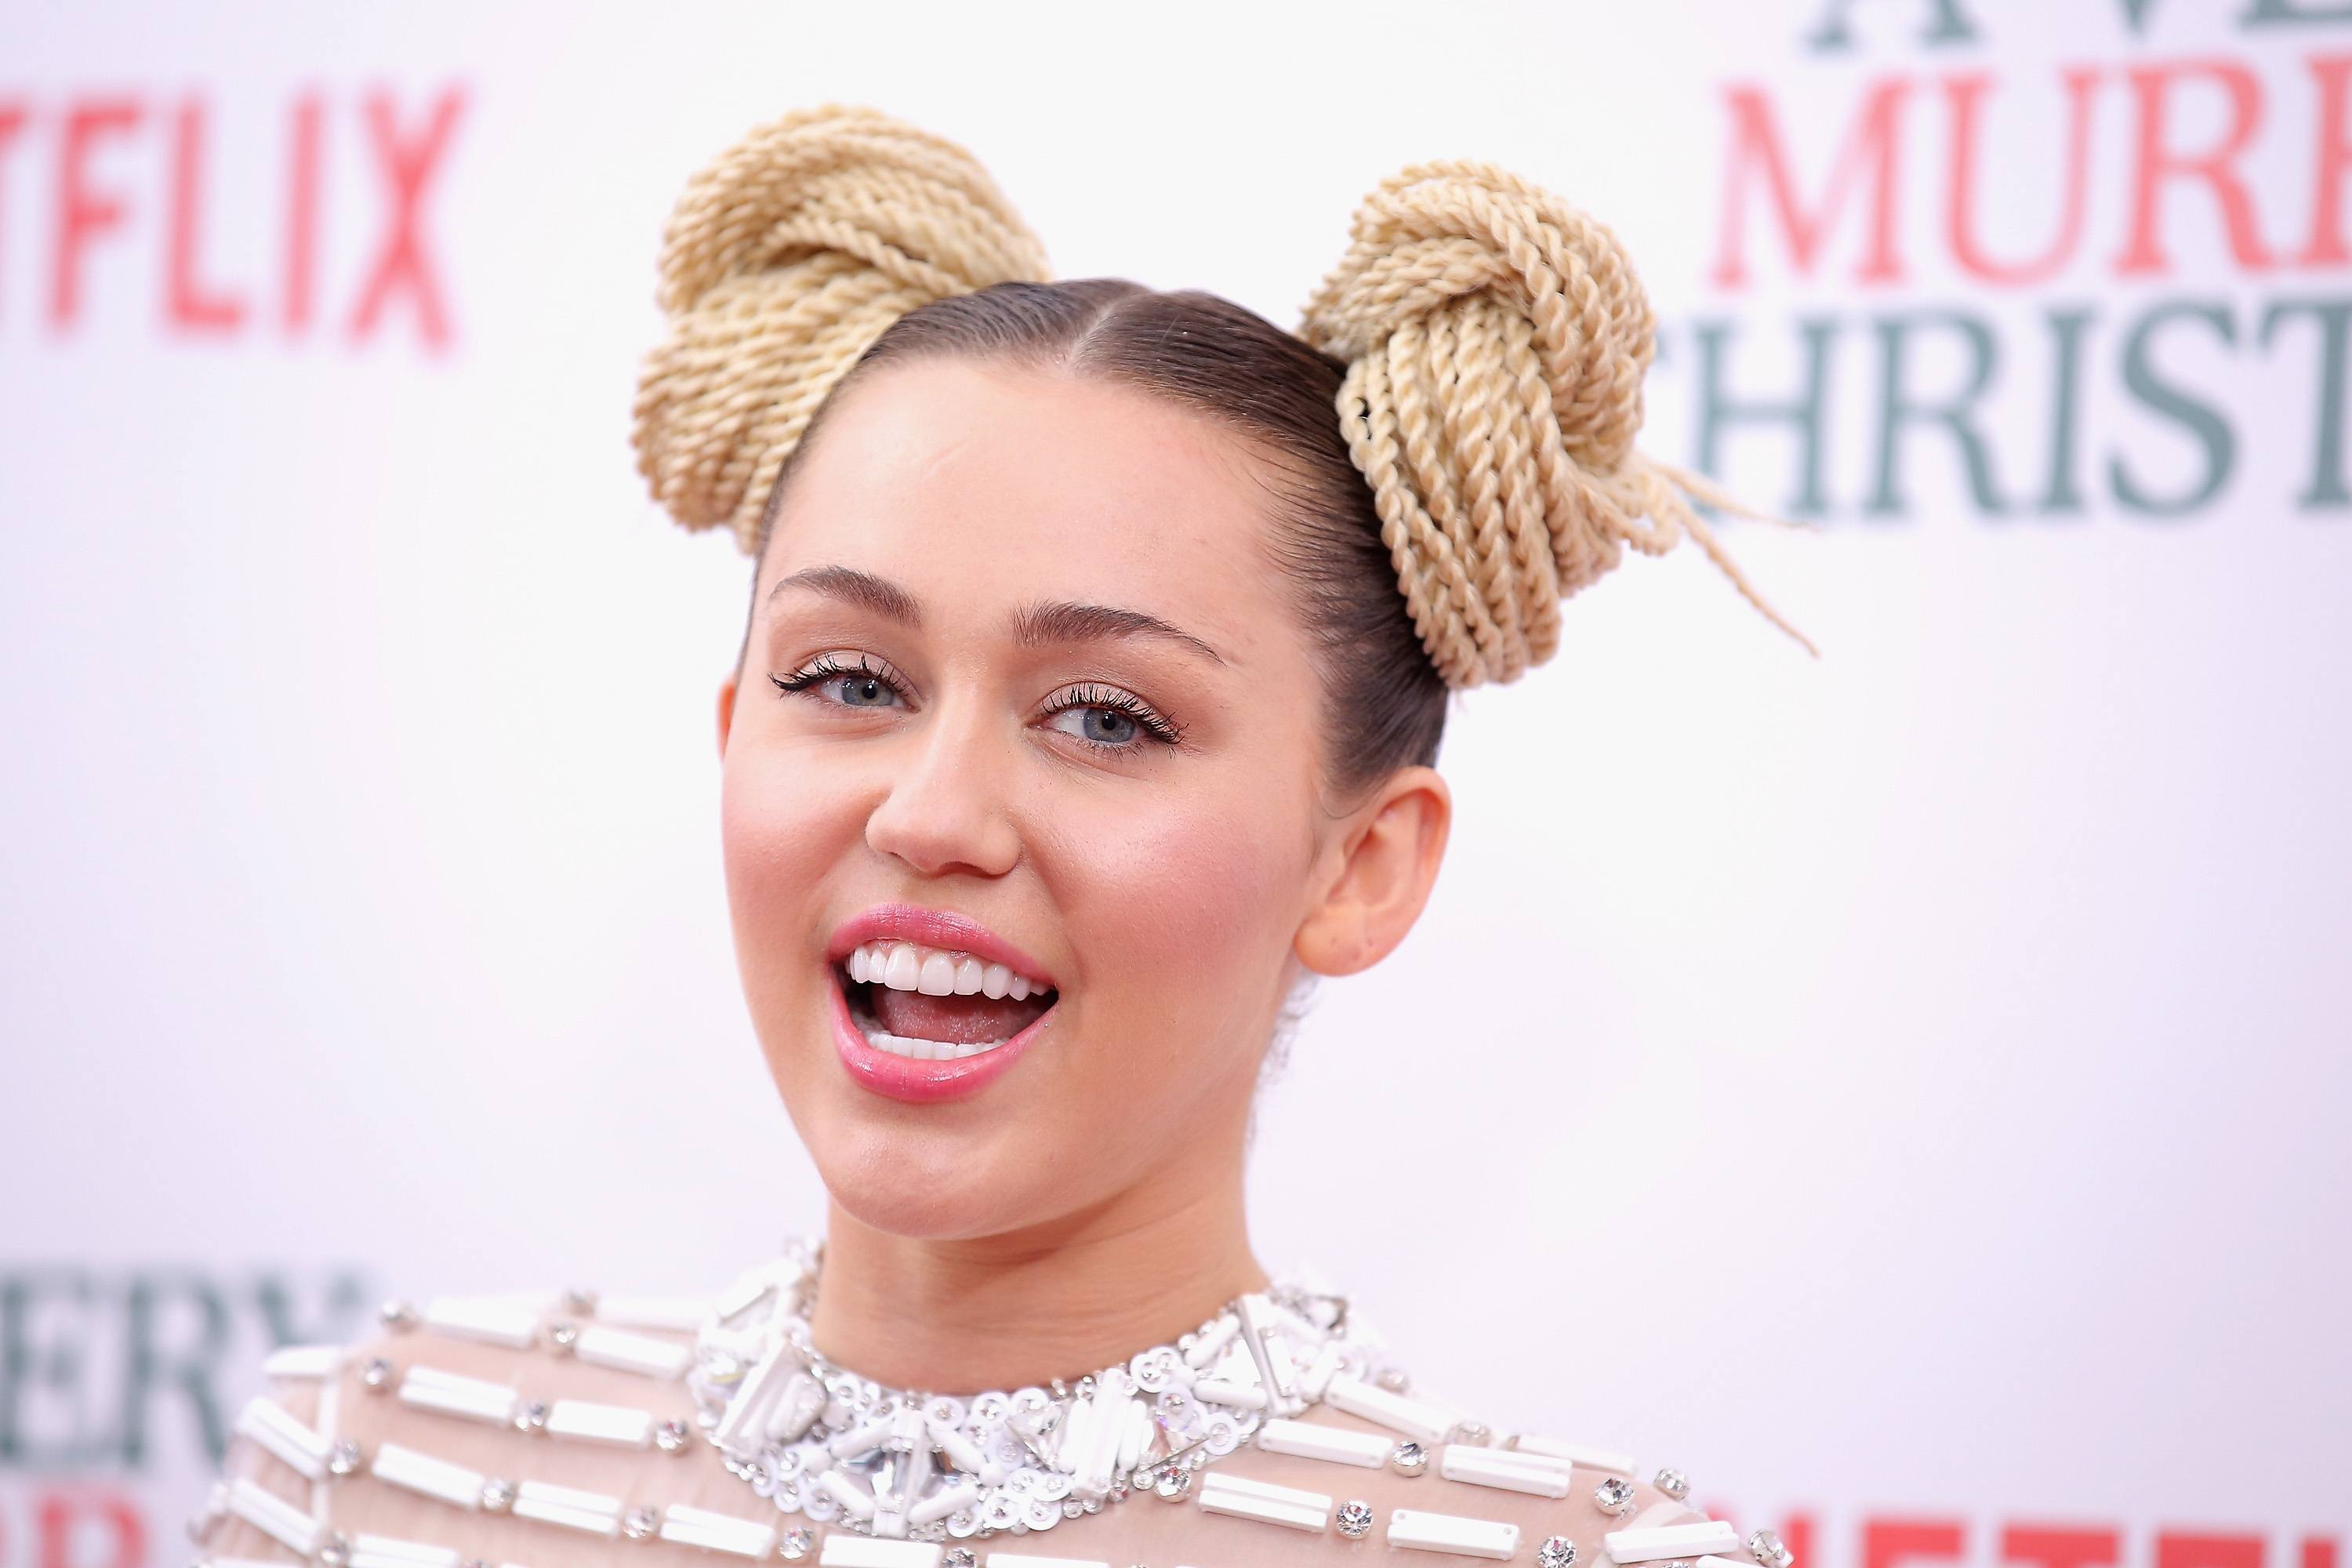 Miley Cyrus is smiling on the red carpet with two twisted hair buns.